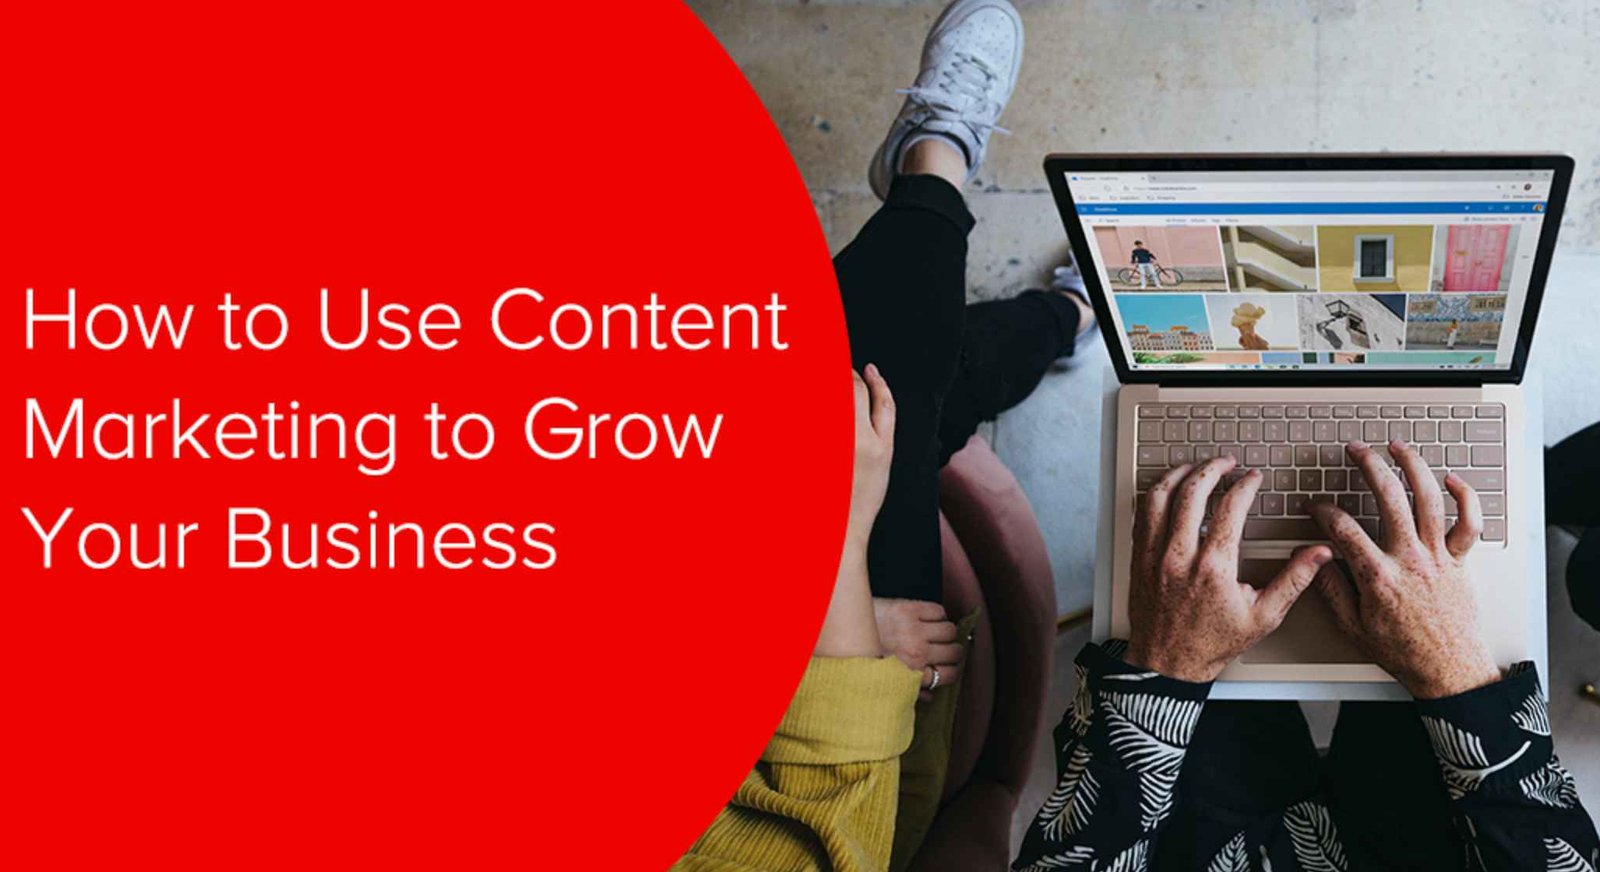 How To Use Content Marketing To Grow Your Business